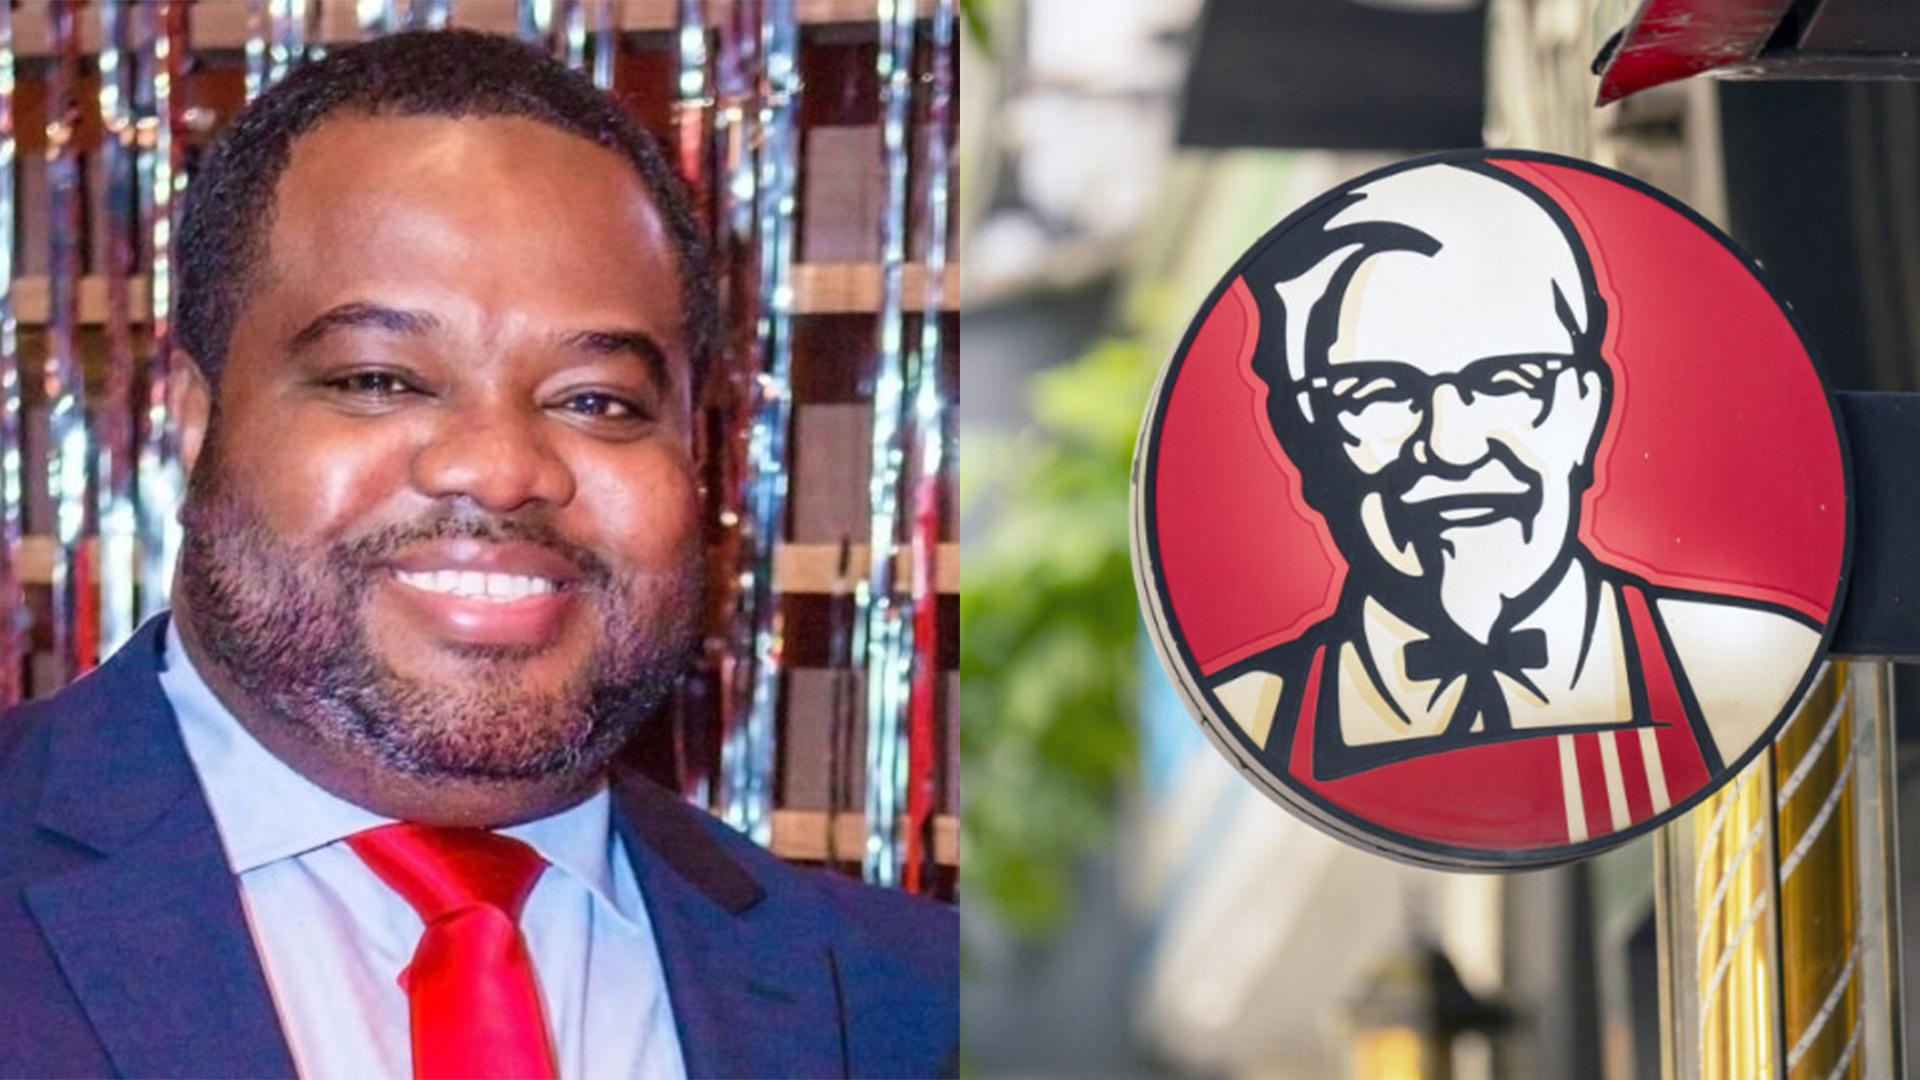 Clinton Lewis Went From Getting A Job As A Cook For KFC At Age 16 To Owning 3 Stores